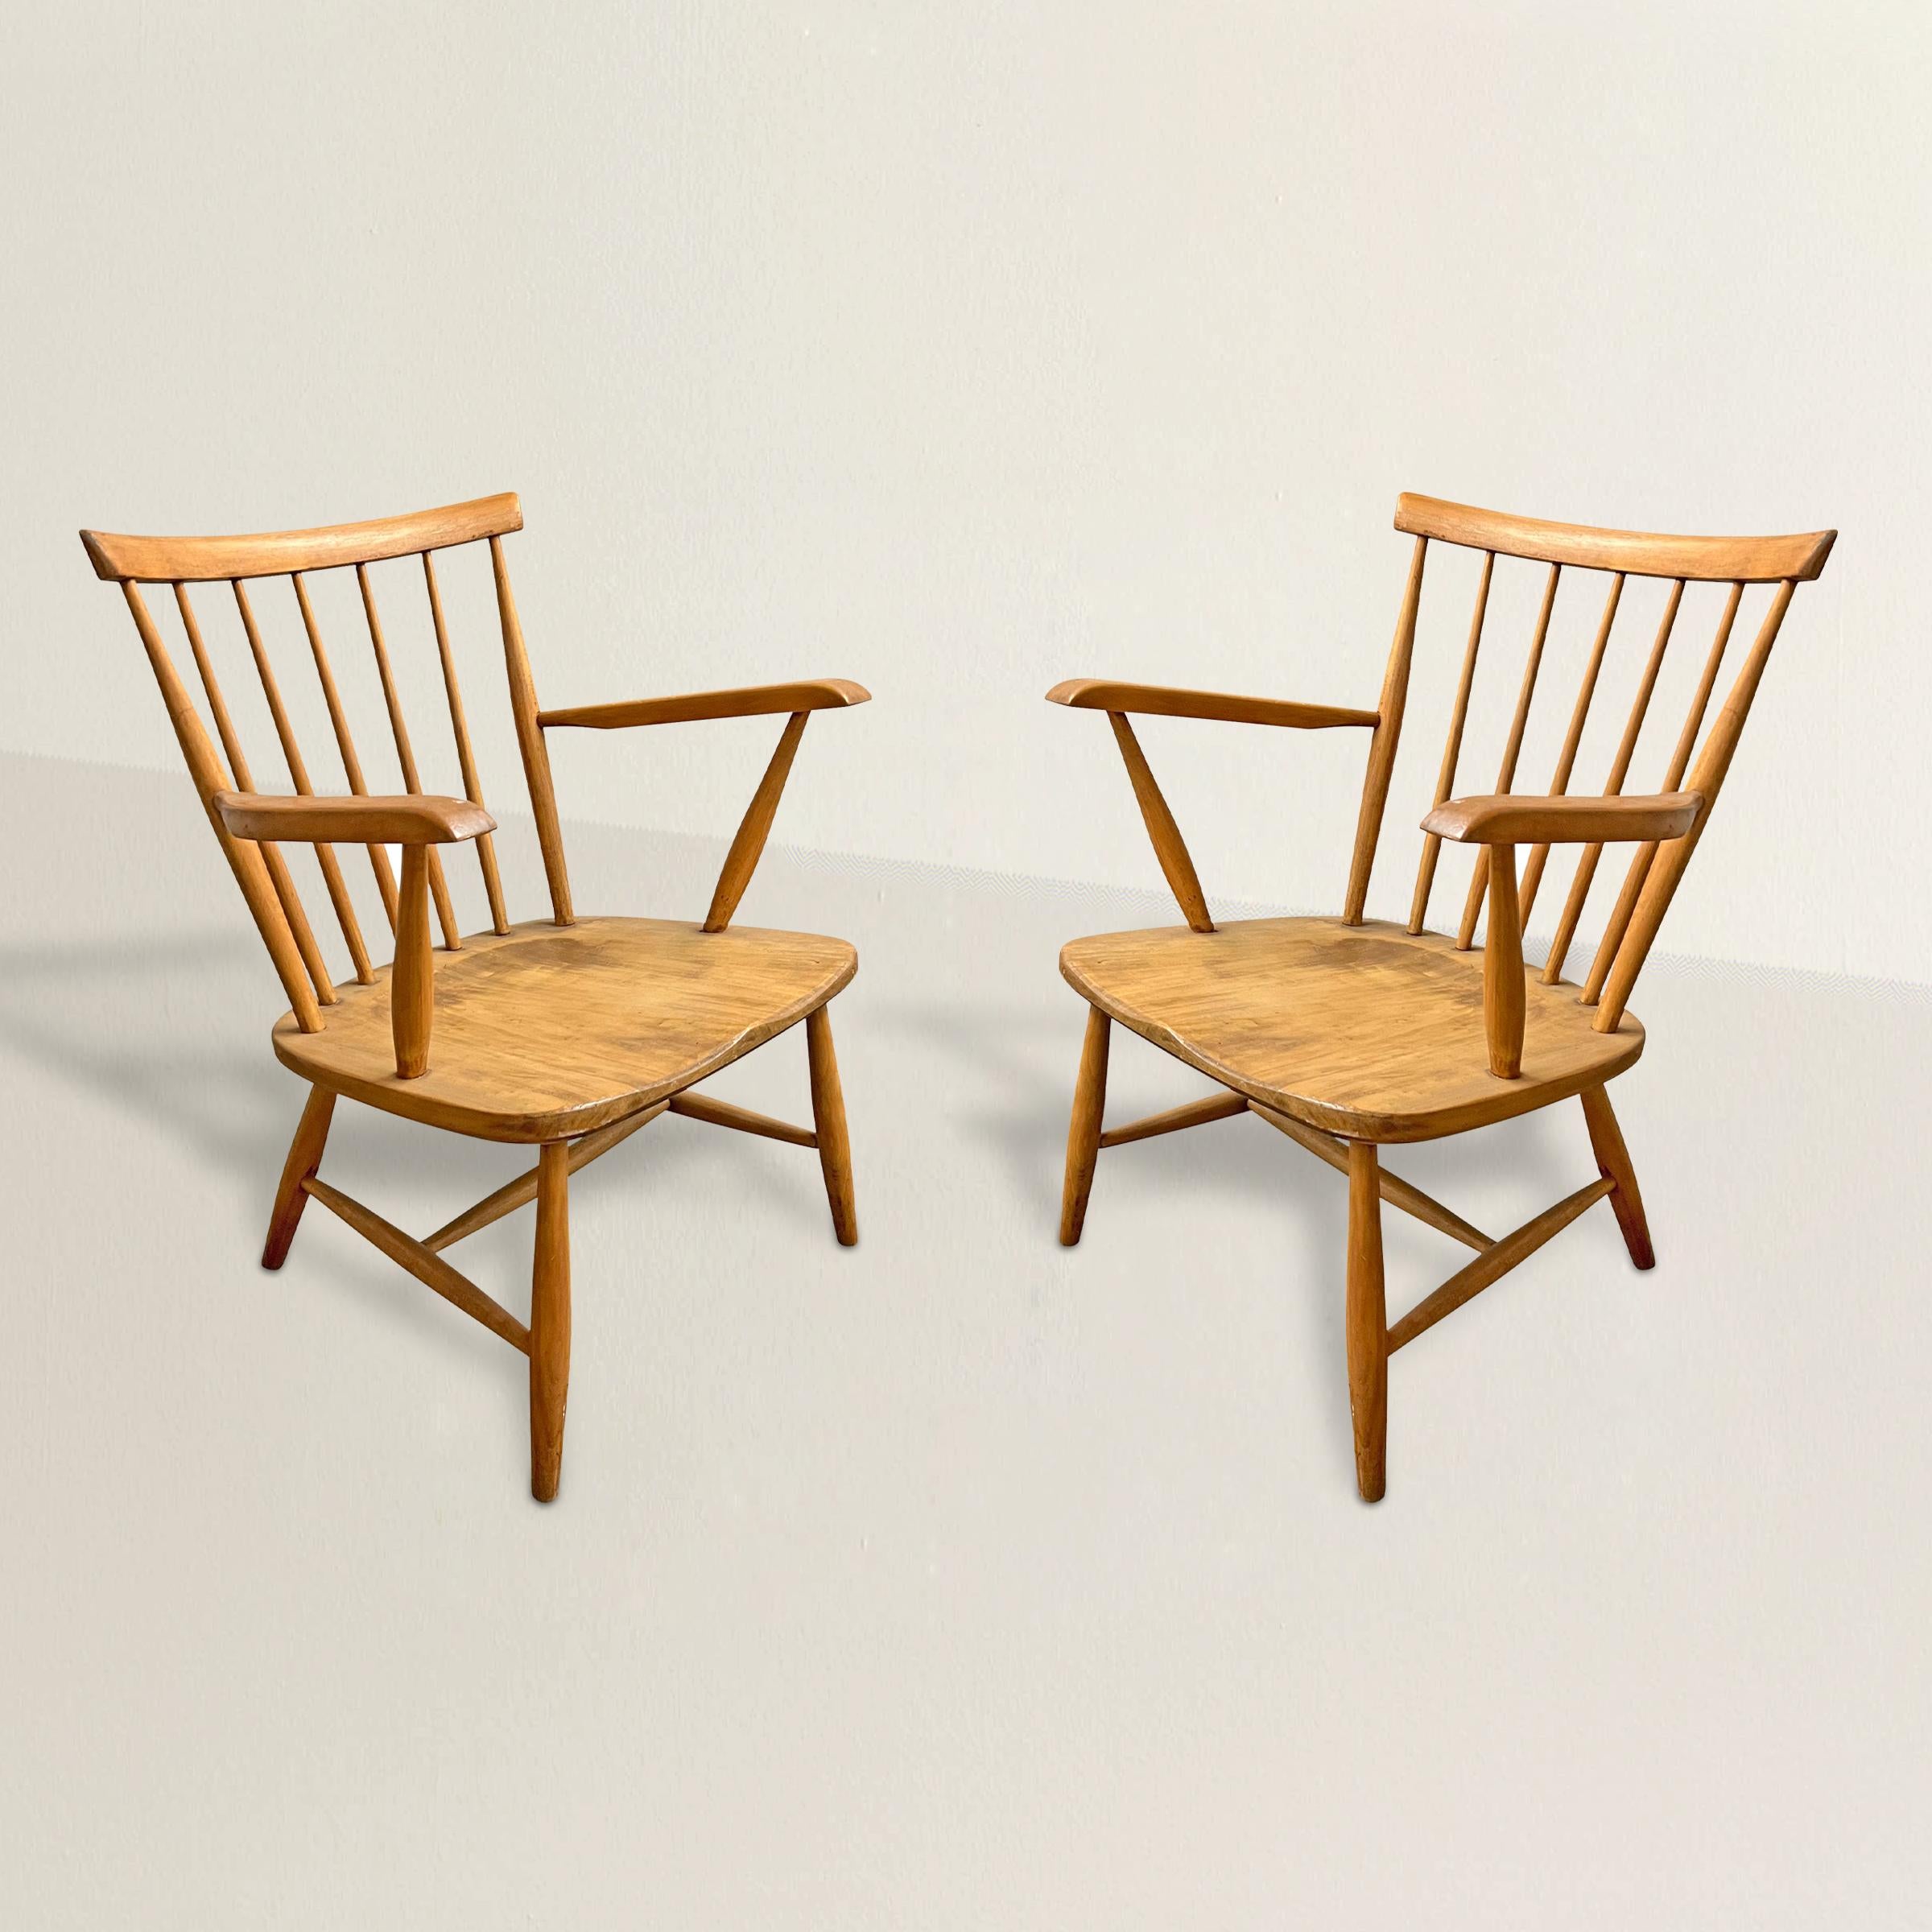 Experience the timeless beauty and innovative design of these mid-20th century Danish Modern beech wood armchairs. Rooted in traditional Windsor chair design, these chairs seamlessly blend the best of classic and contemporary aesthetics. With their